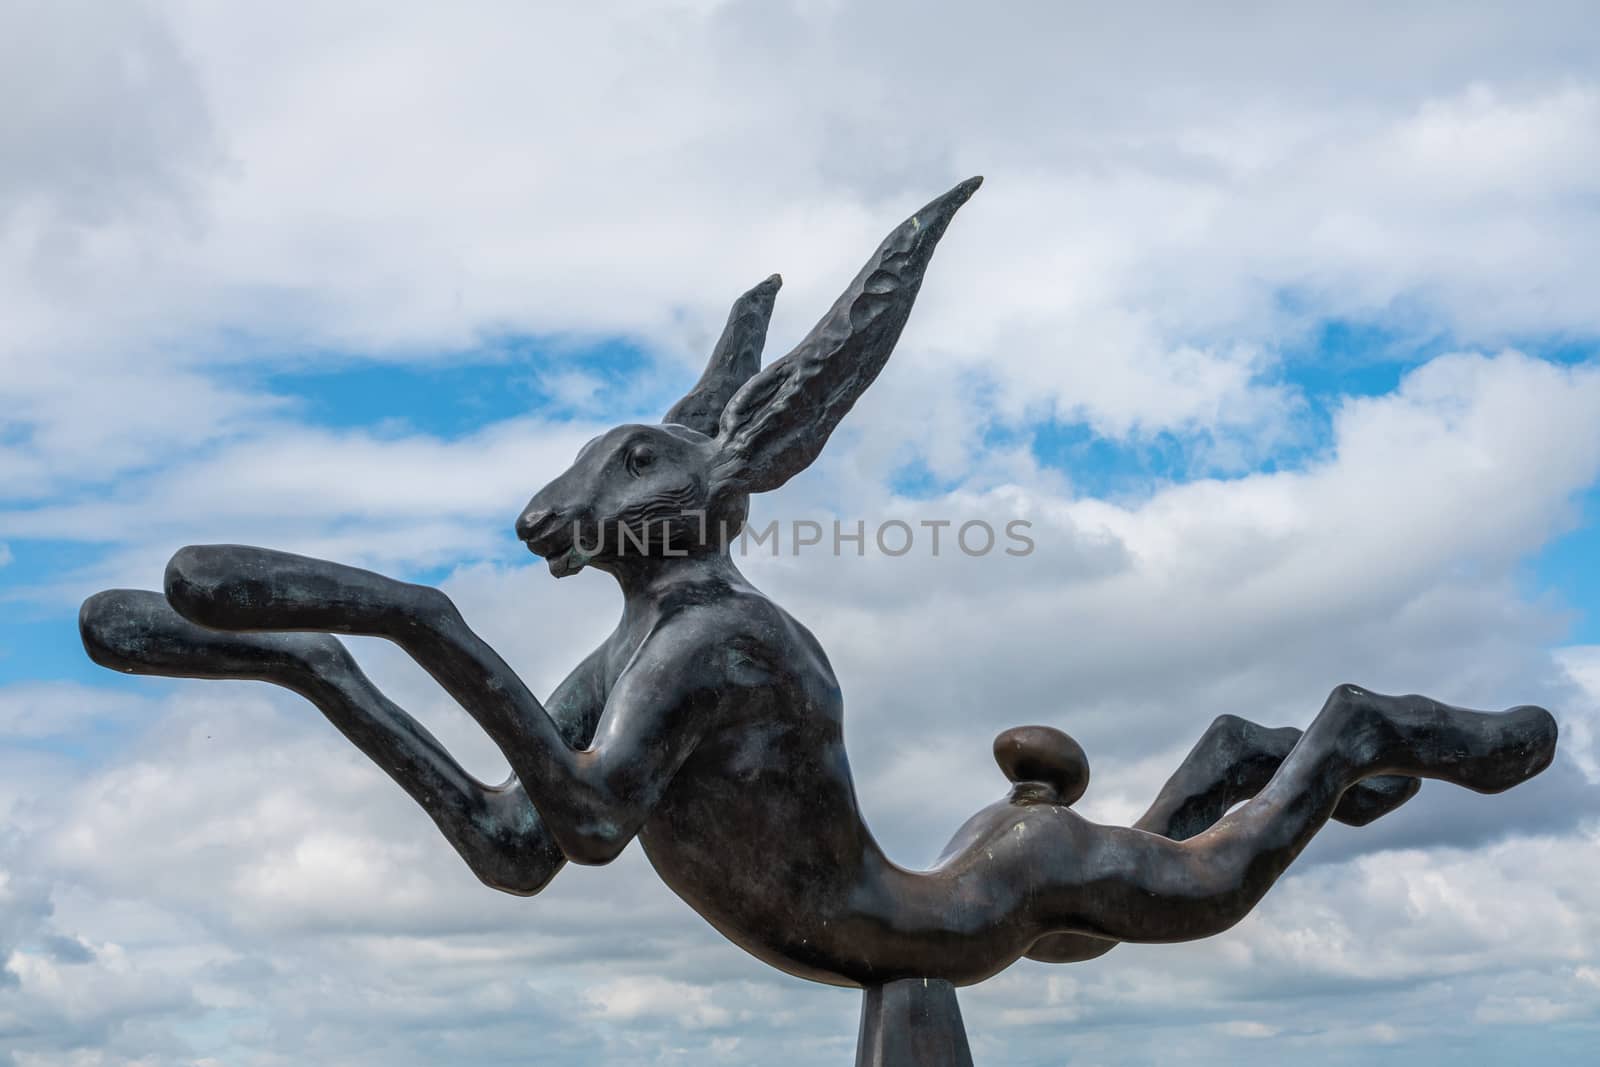 Closeup of jumping Hare Statue at end of boardwalk, Knokke-Heist by Claudine